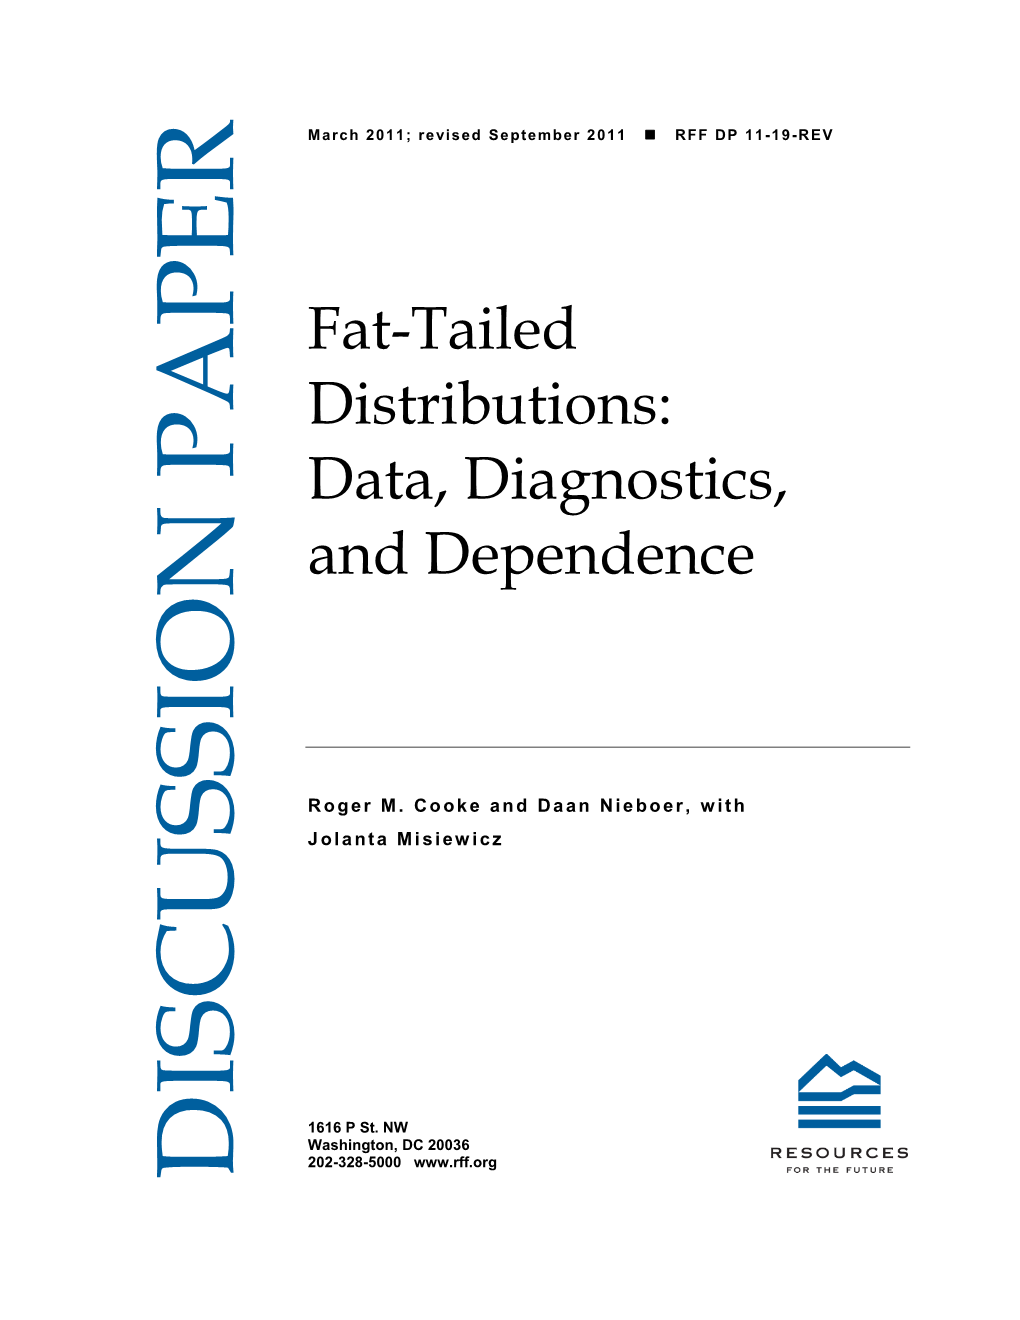 Fat-Tailed Distributions: Data, Diagnostics, and Dependence